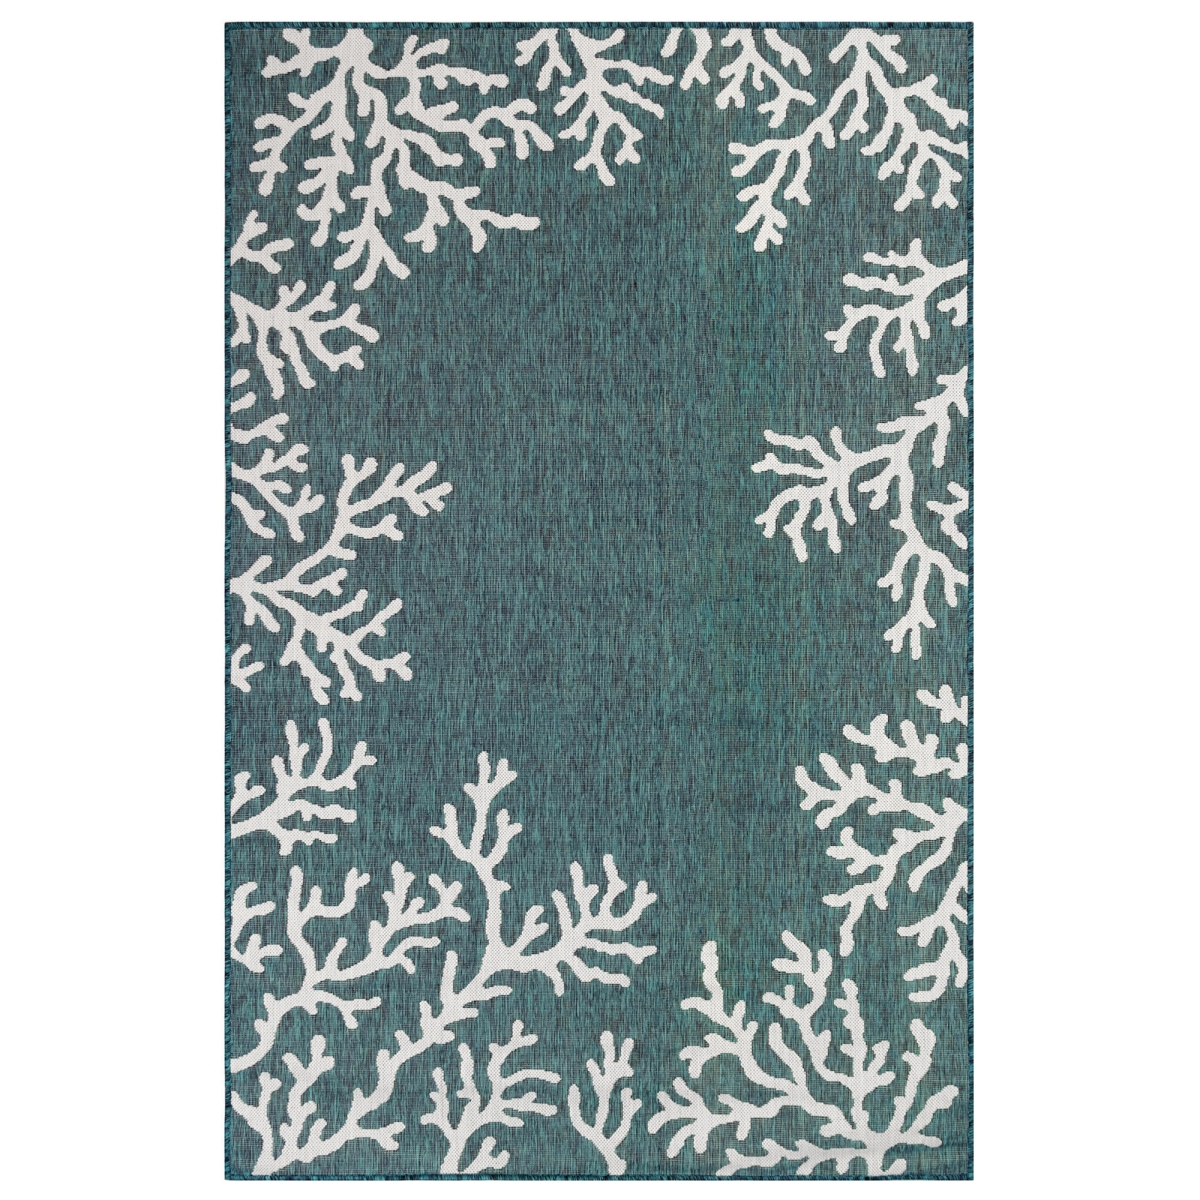 Cre80844894 Liora Manne Carmel Coral Border Indoor & Outdoor Rug, Teal - 7 Ft. 10 In. X 9 Ft. 10 In.